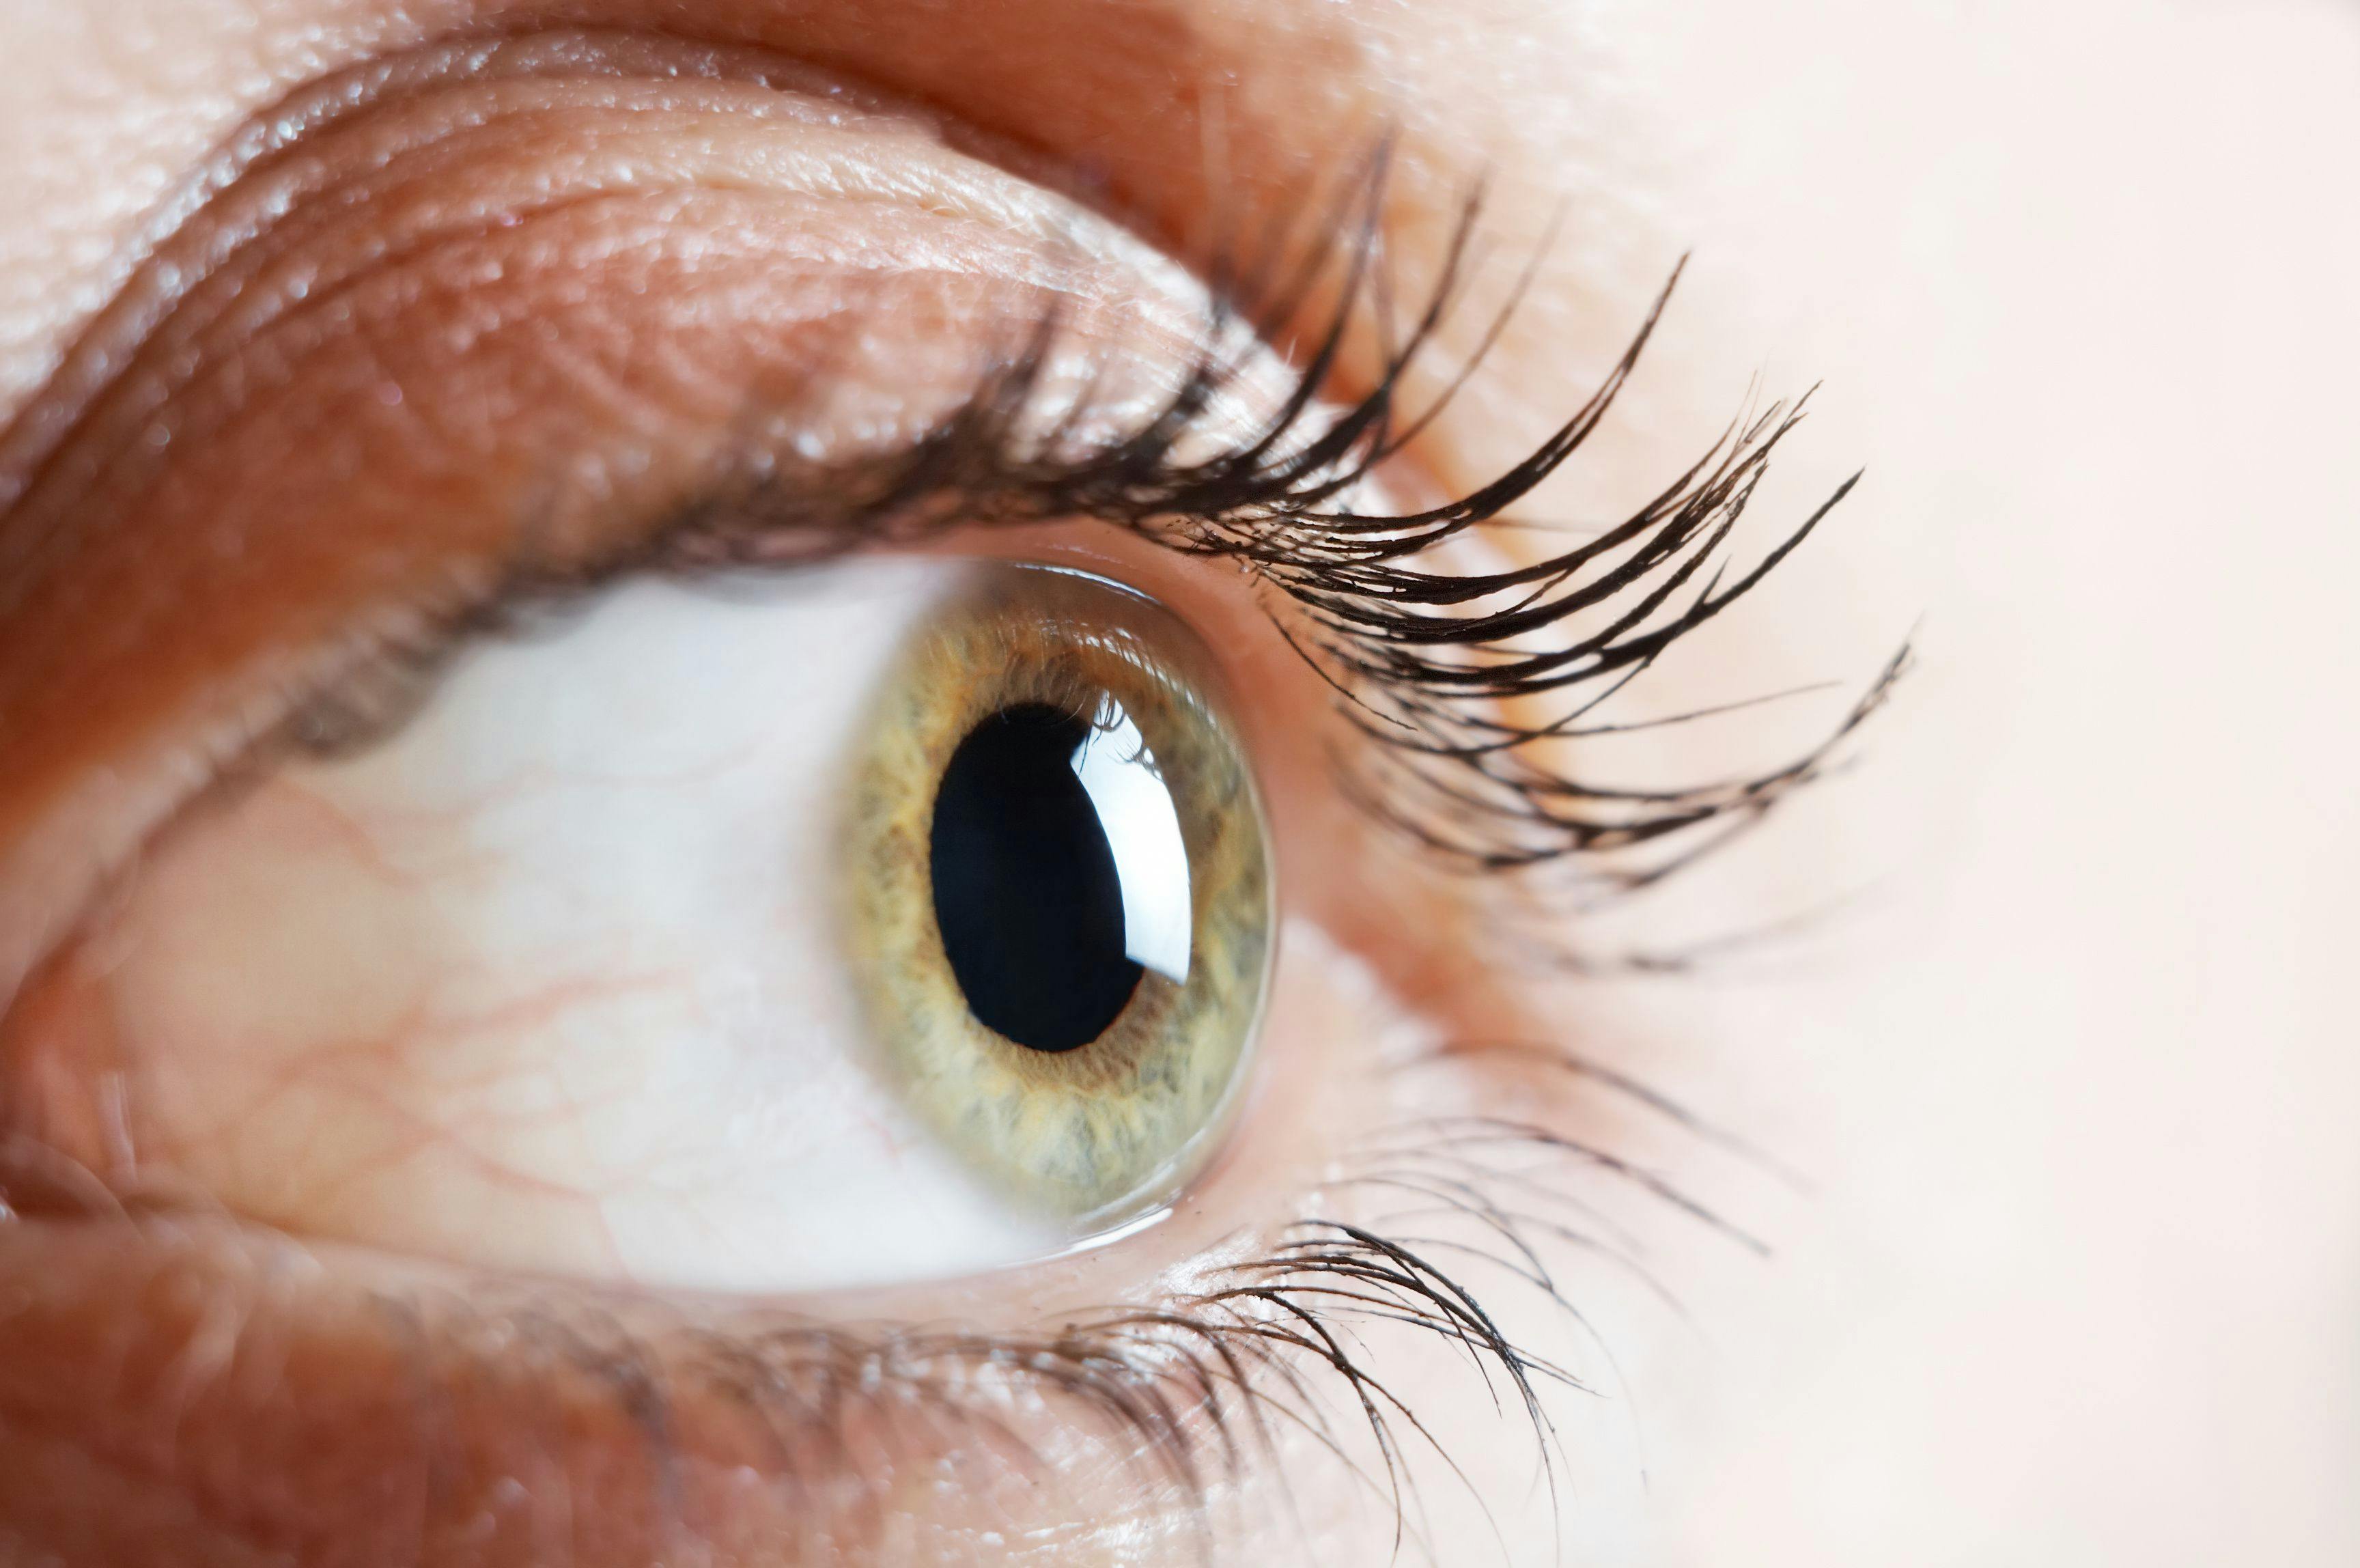 Trends in corneal treatment include cutting-edge advancements